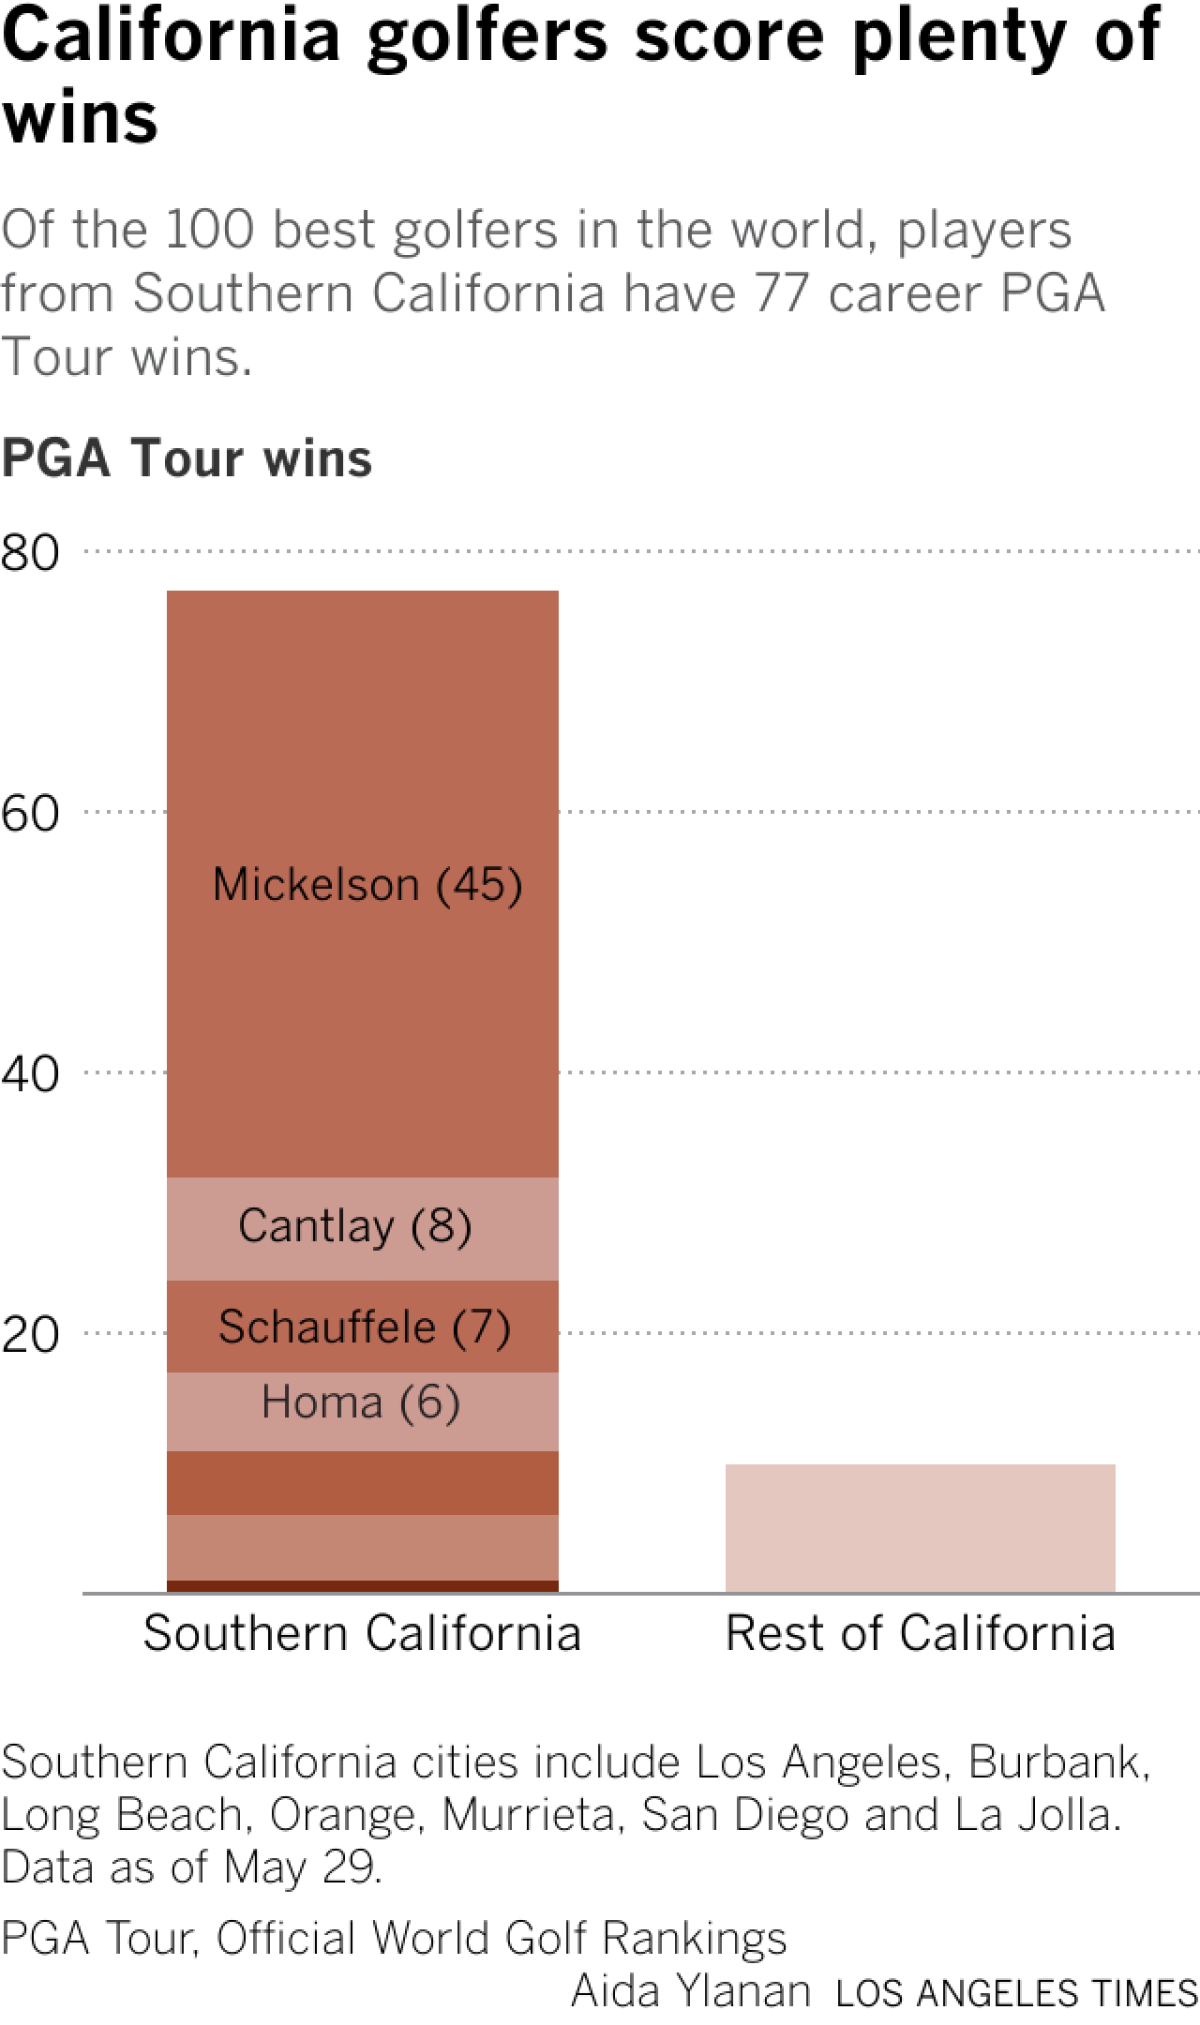 Of the 100 best golfers in the world, players from Southern California have 77 career PGA Tour wins.